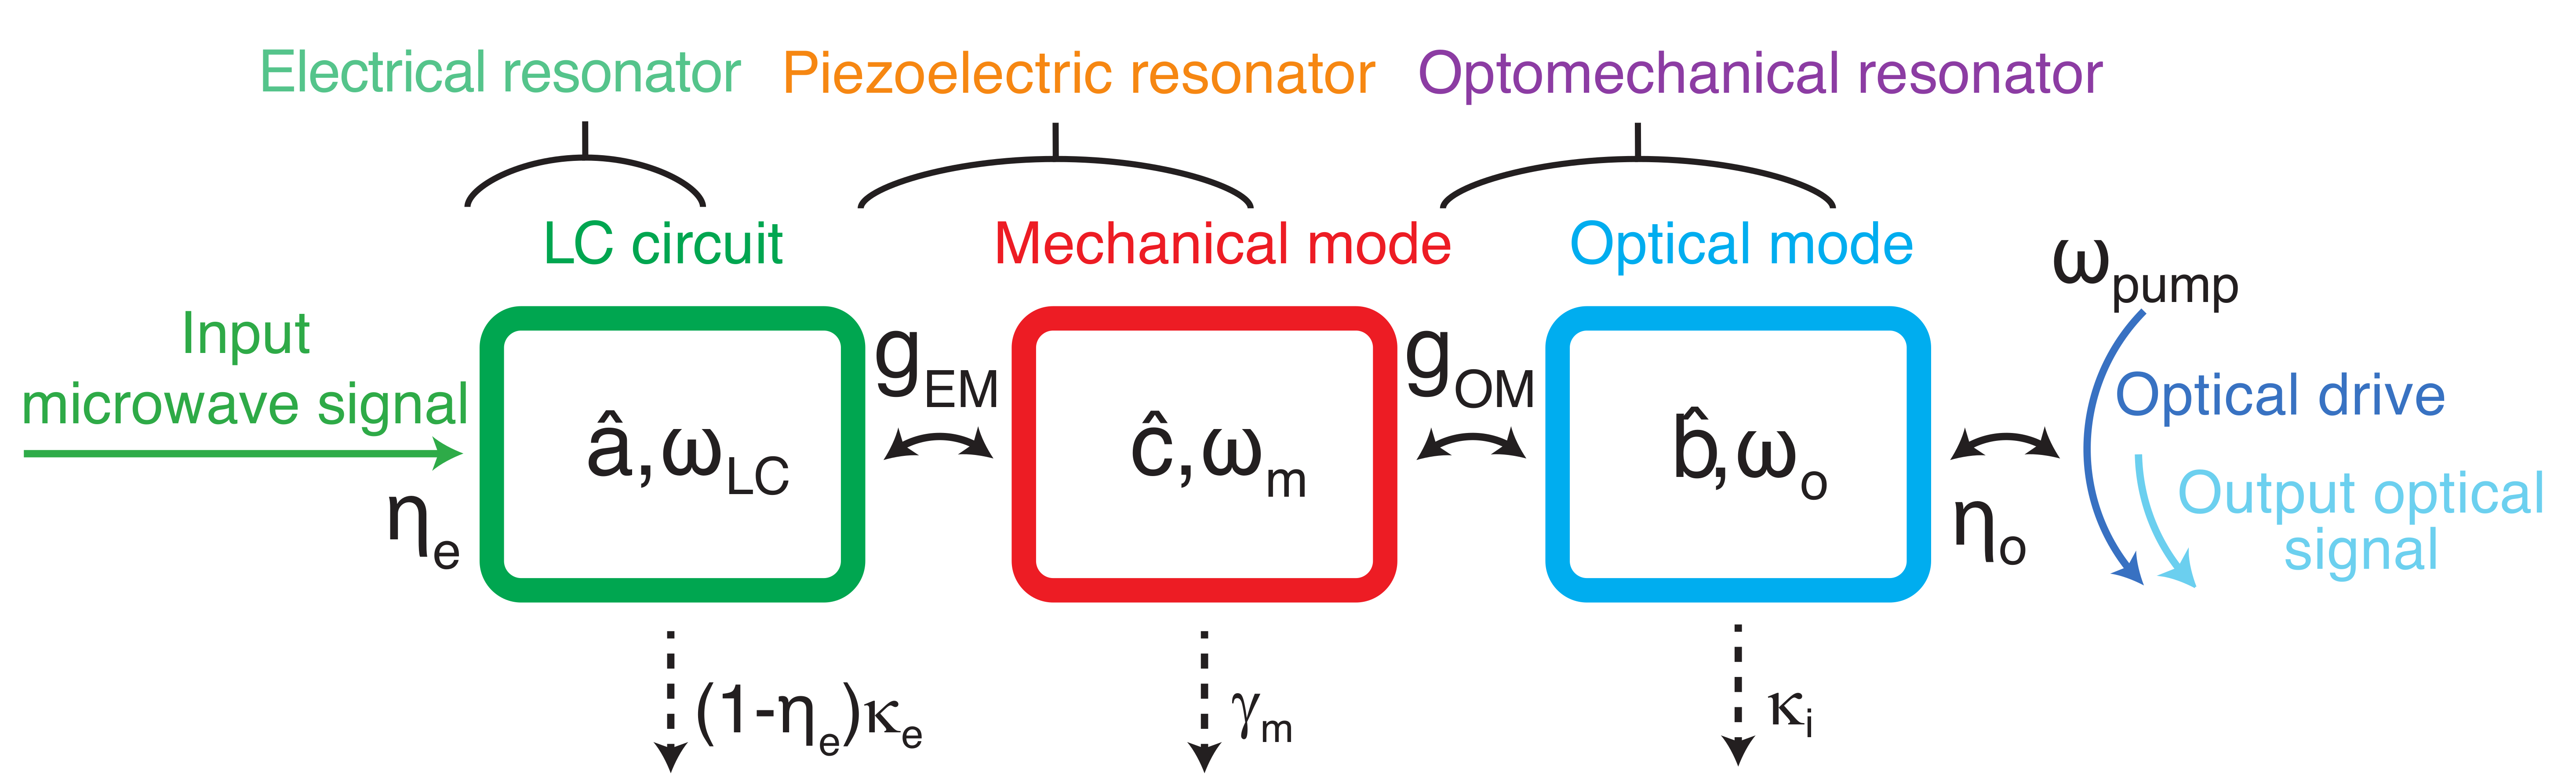 Electro-optomechanical transduction chain in which a mechanical mode acts as an intermediary between microwave and optical frequencies.